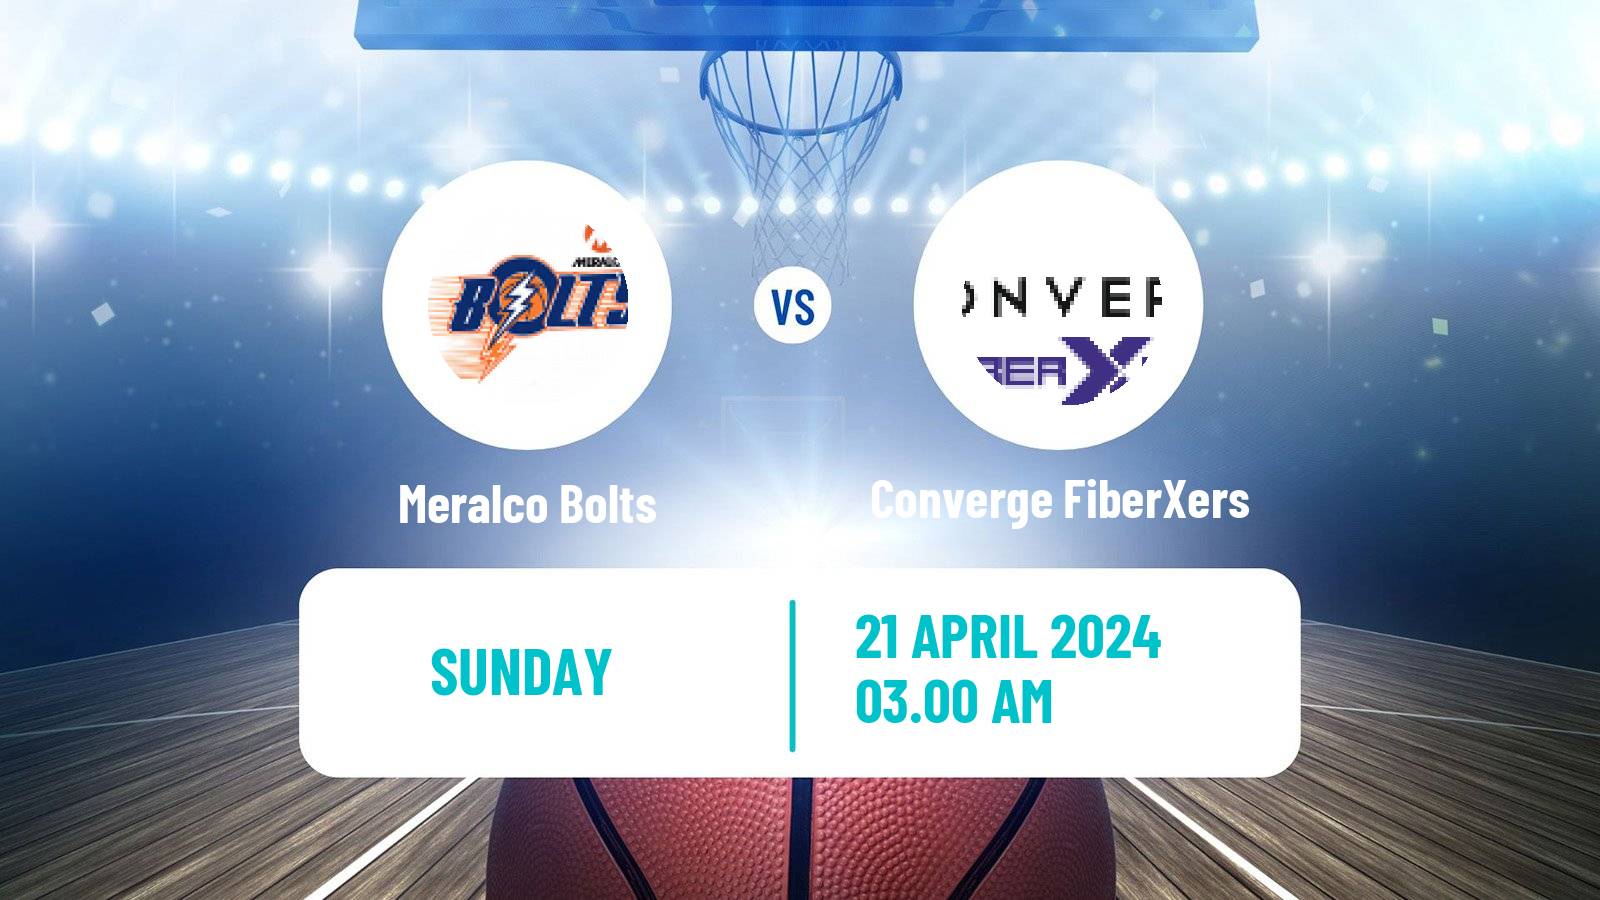 Basketball Philippines Cup Meralco Bolts - Converge FiberXers